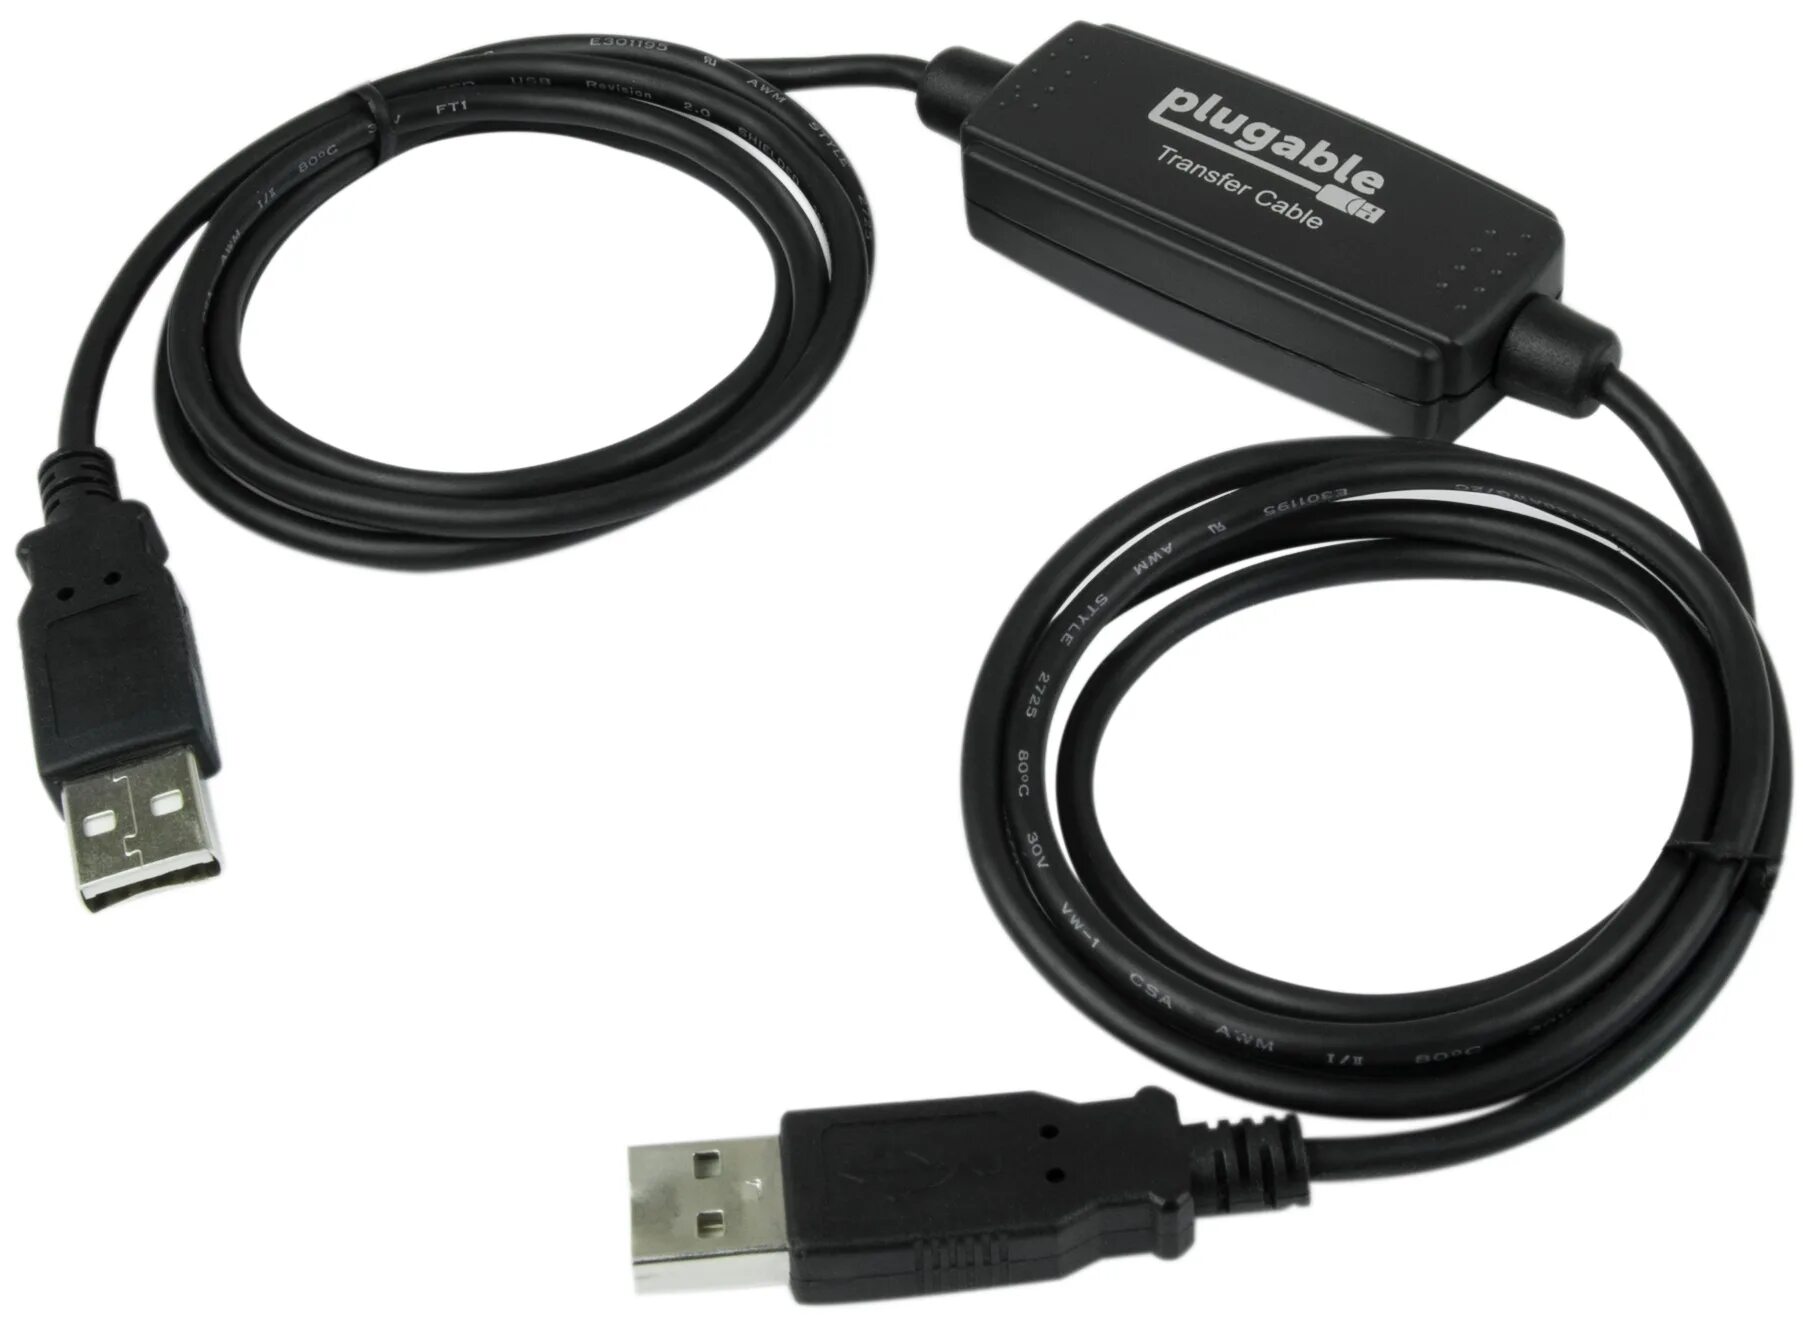 Easy transfer. Easy transfer Cable (etc) USB-кабели. Windows easy transfer Cable. Laplink USB Cable. Кабель PC-2 USB.